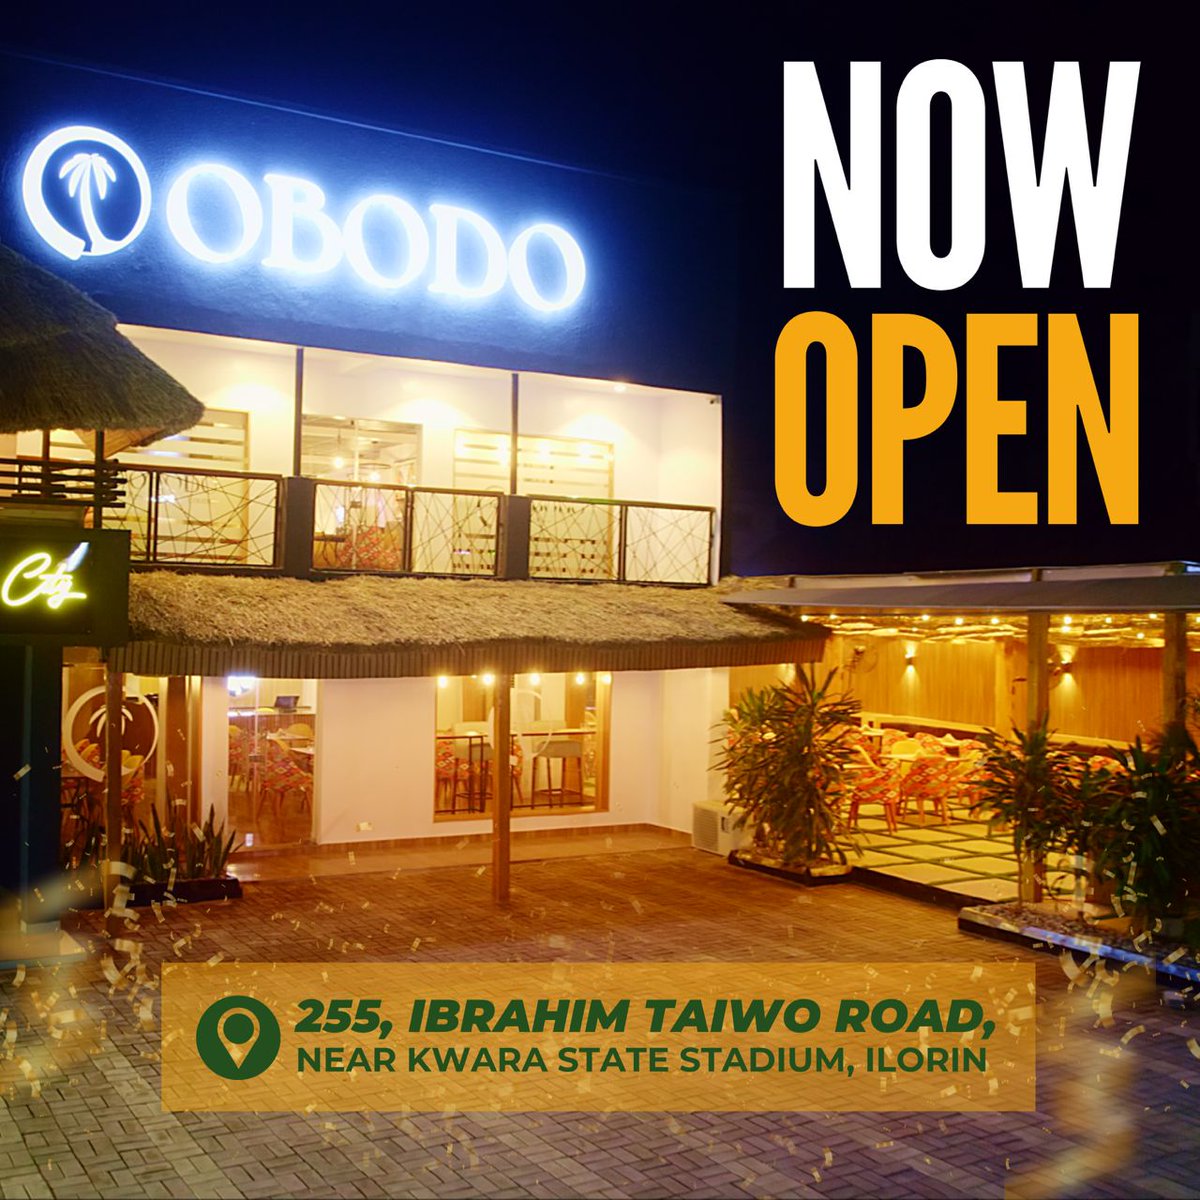 We're officially open for Business 🎊🤸💃🕺💃. All set and ready to give you a great experience. 📍 255 Ibrahim Taiwo Road Ilorin #ilorin